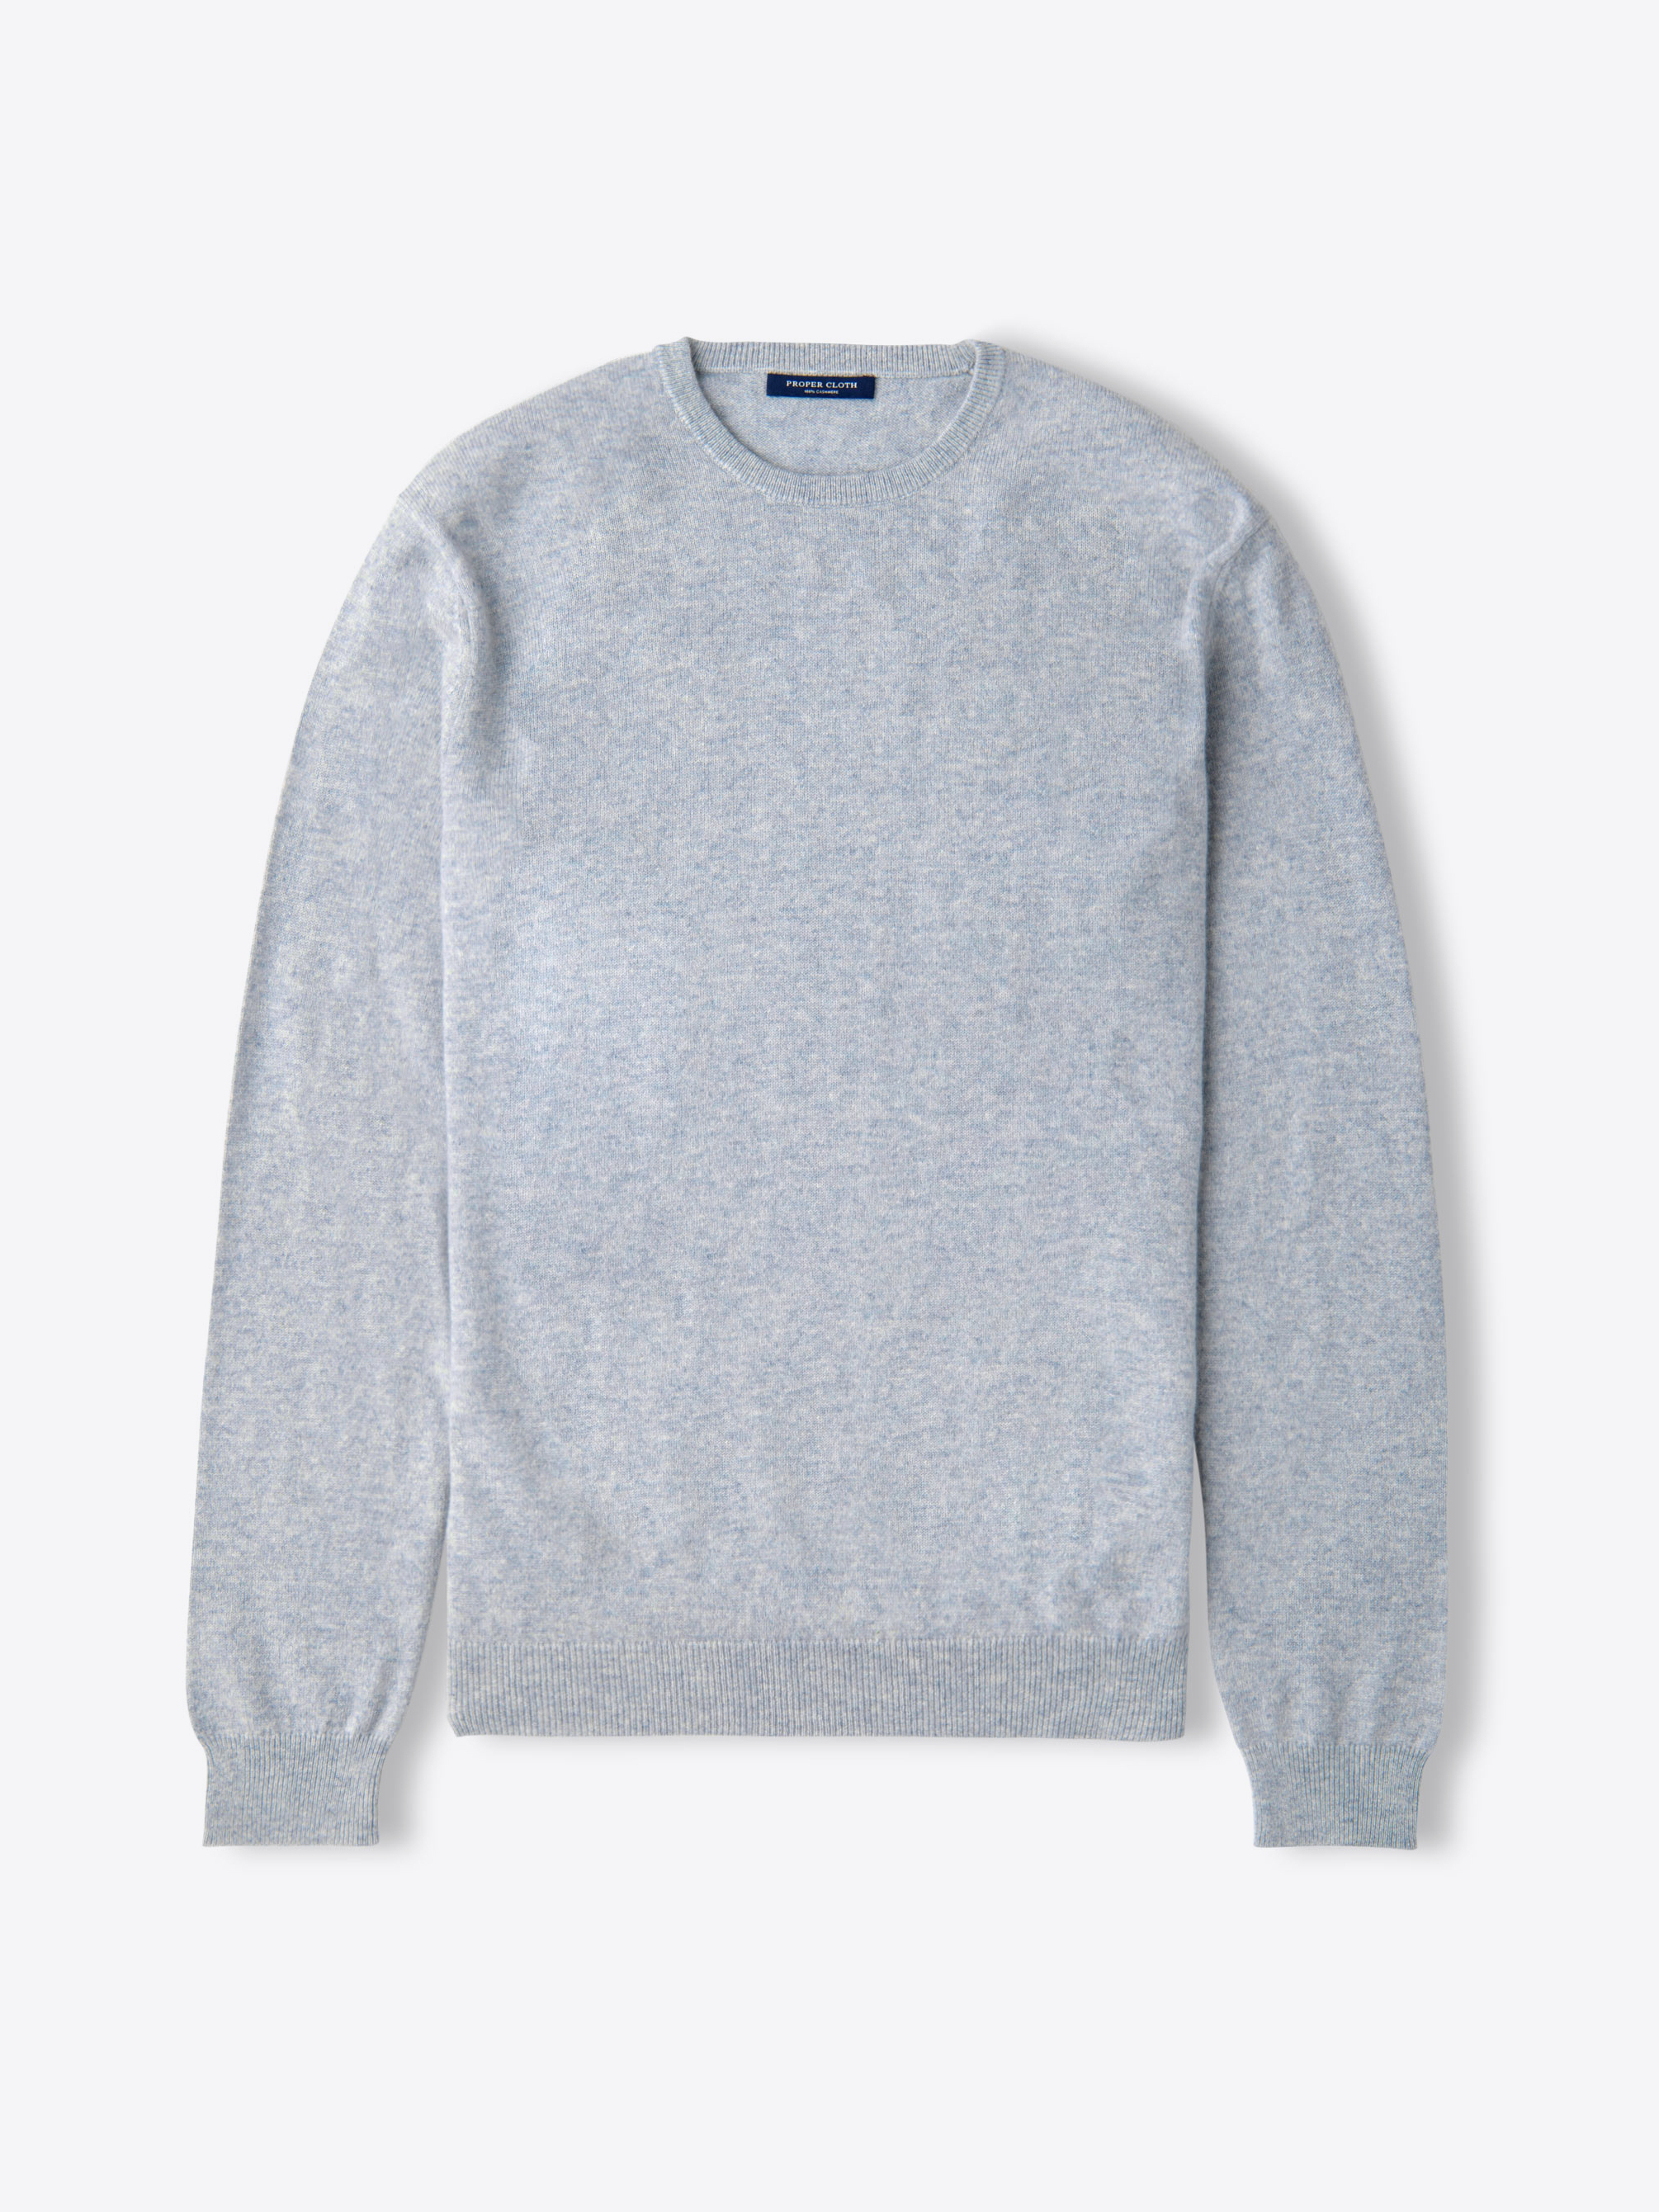 Zoom Image of Frost Blue Cashmere Crewneck Sweater